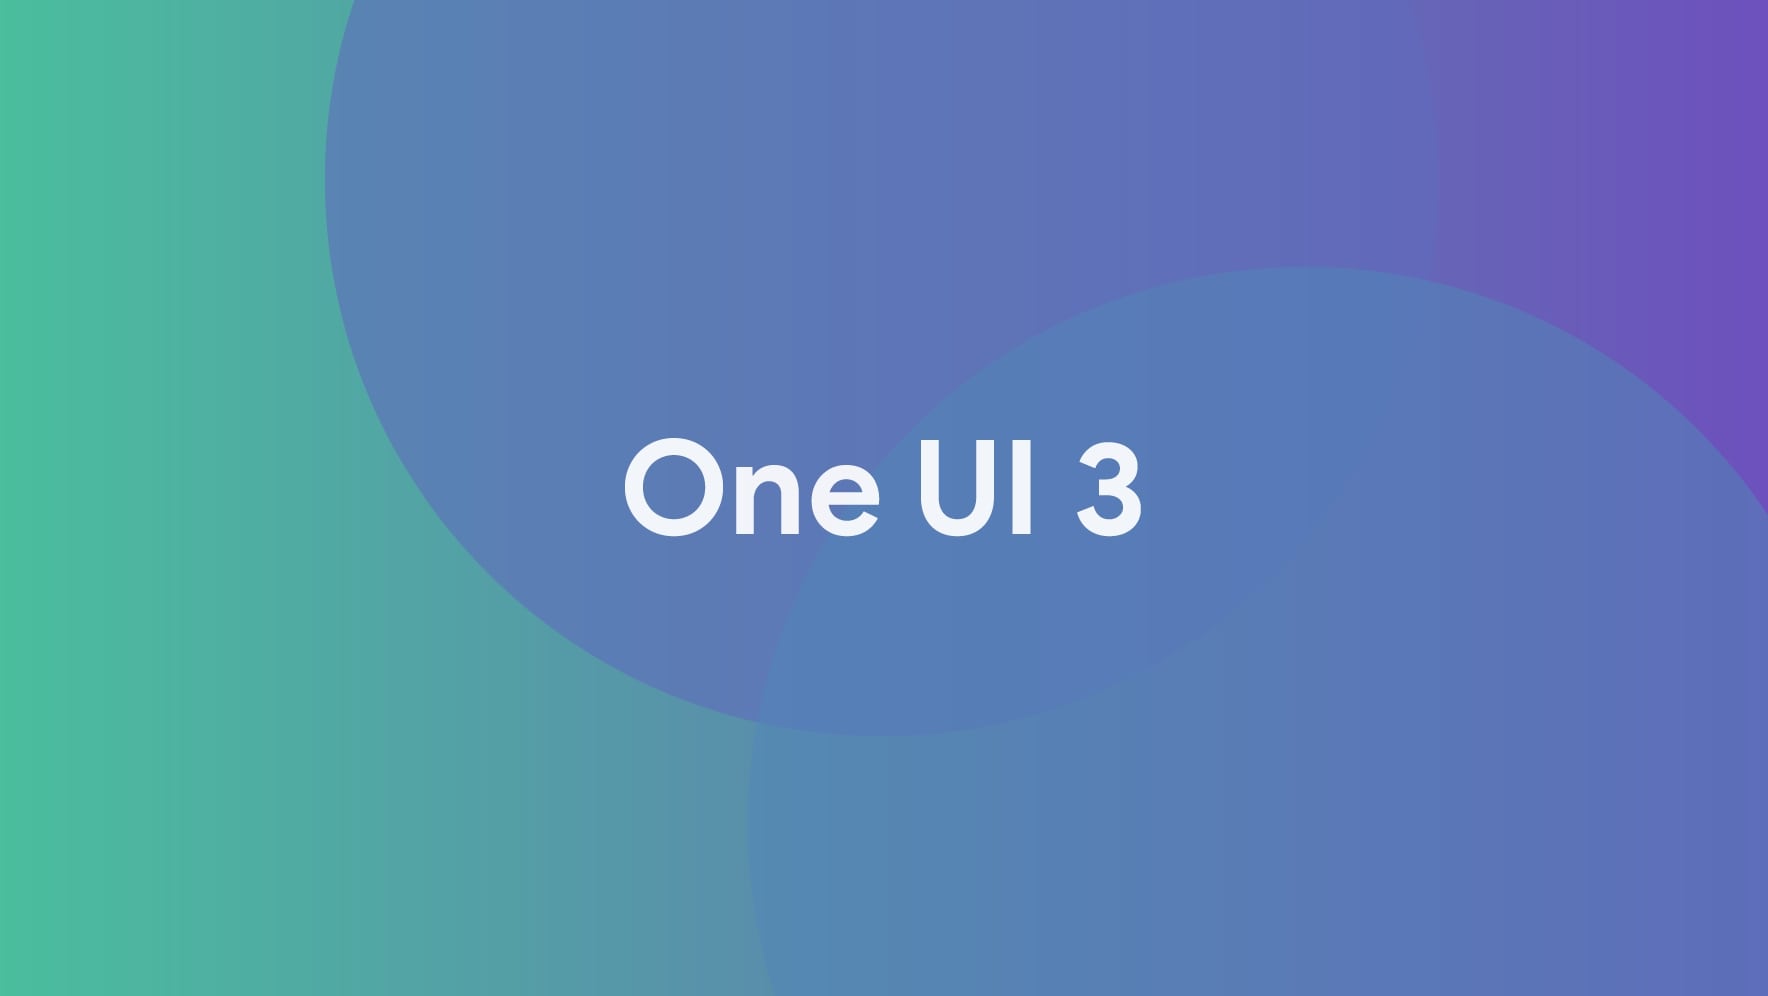 Samsung One UI 3.0 based on Android 11